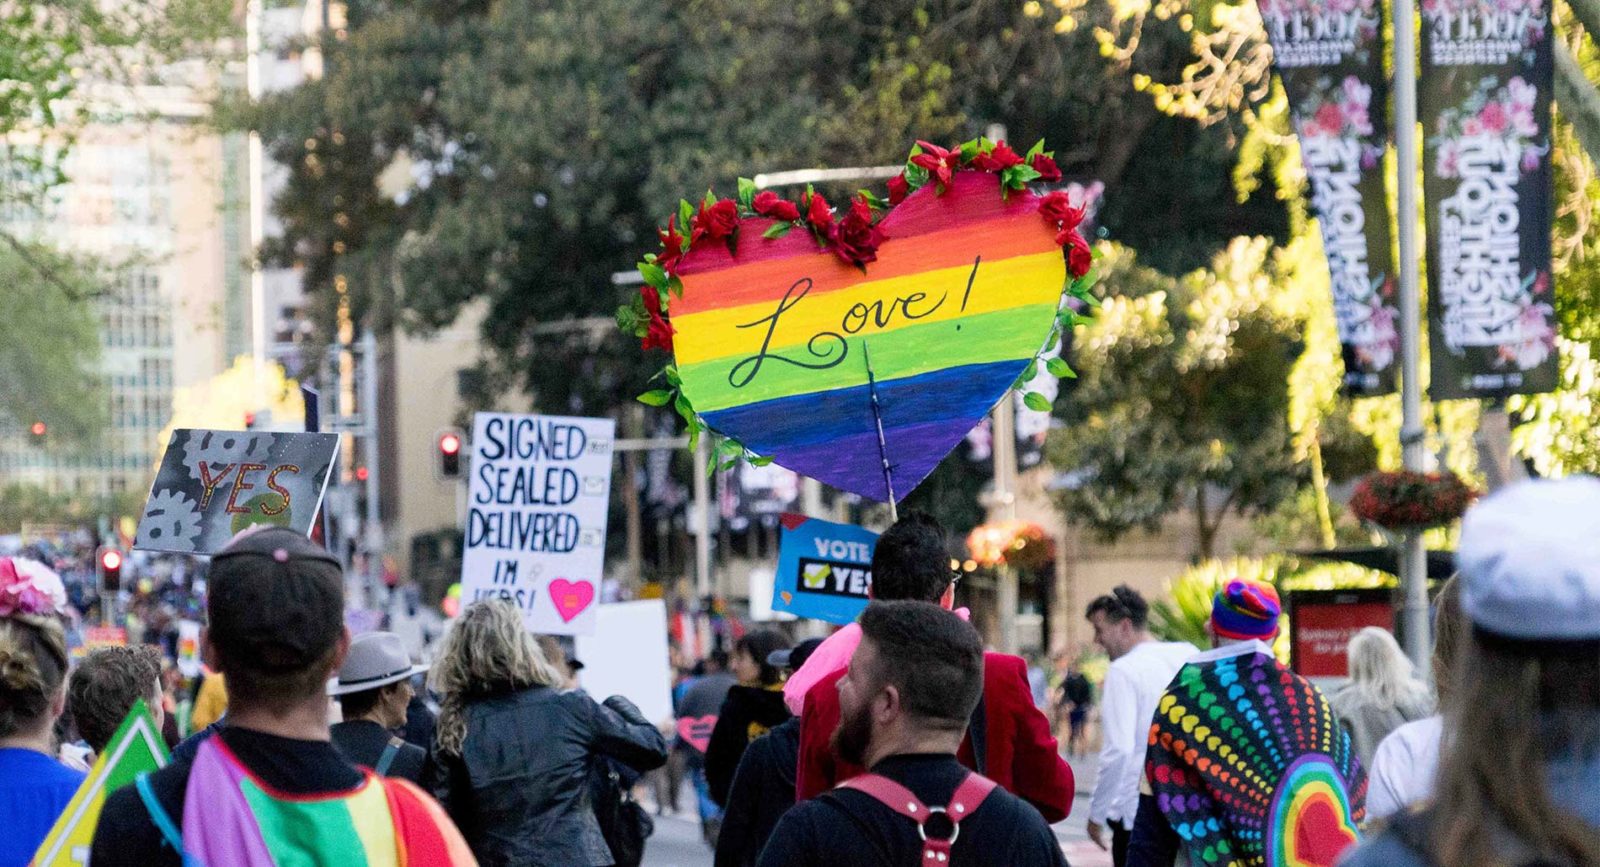 A photo of a crowd of people gather for a rally marriage equality rally in Sydney. There are numerous people holding rainbow flags and carrying signs that say 'Love!' and 'Vote Yes!'